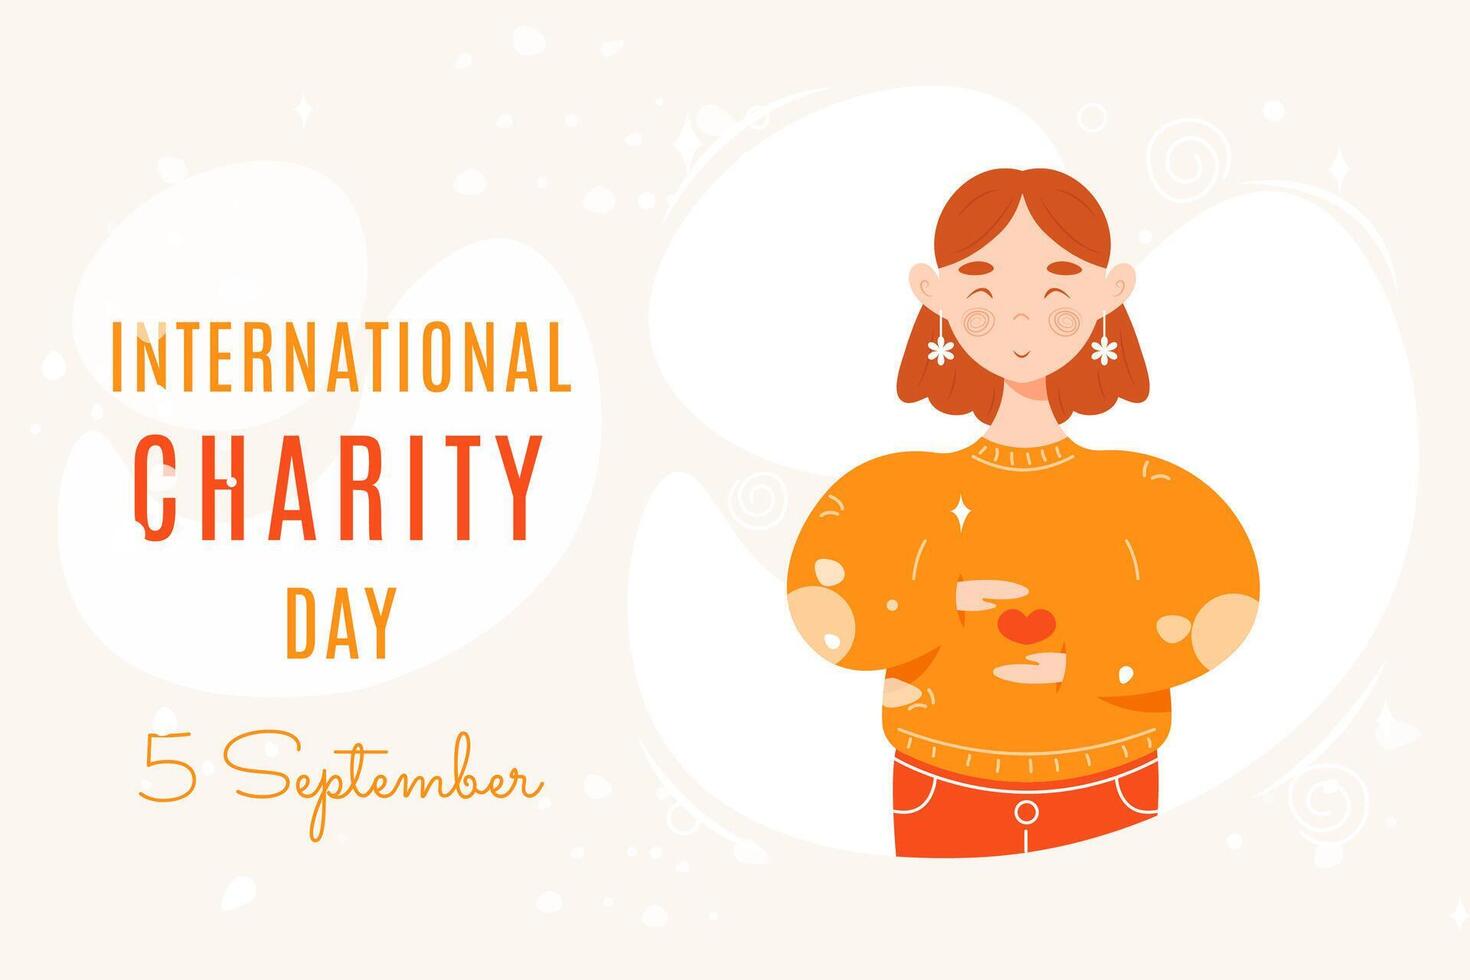 International Charity Day banner with smiling young girl holding heart in her hands. Flat cartoon character. Concept of charity. Perfect for horizontal banner, poster, website and so on vector